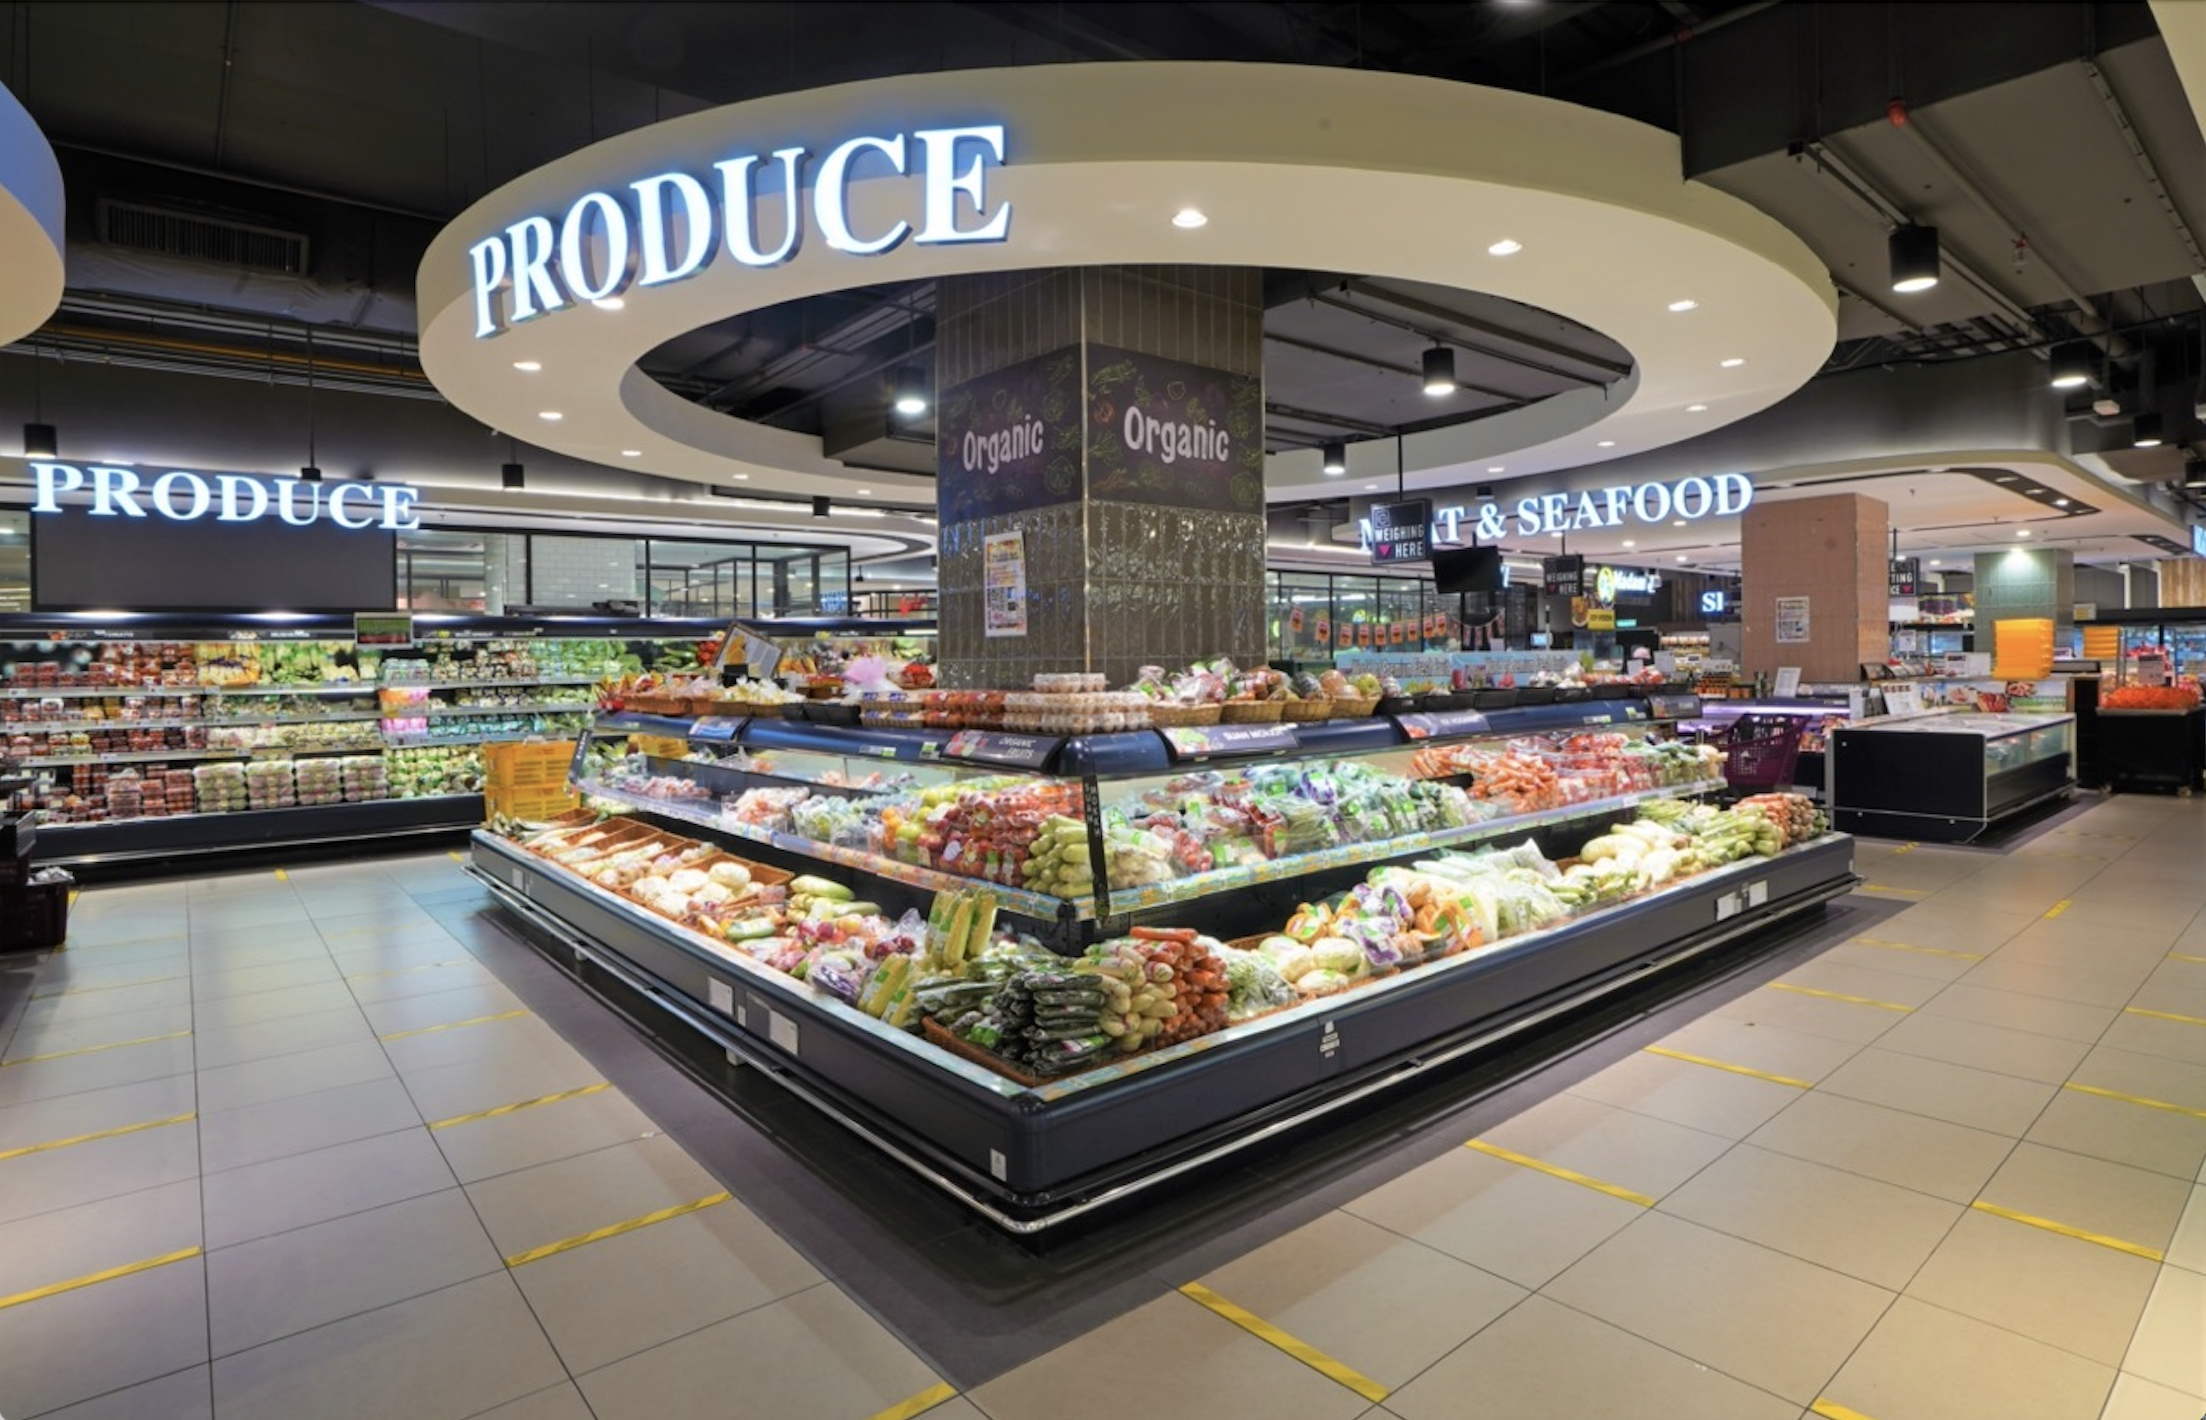 Malaysia-based retail chain aeon co. (m) bhd (aeon or the company) won praise today for publishing a comprehensive new animal health and welfare policy that protects the 